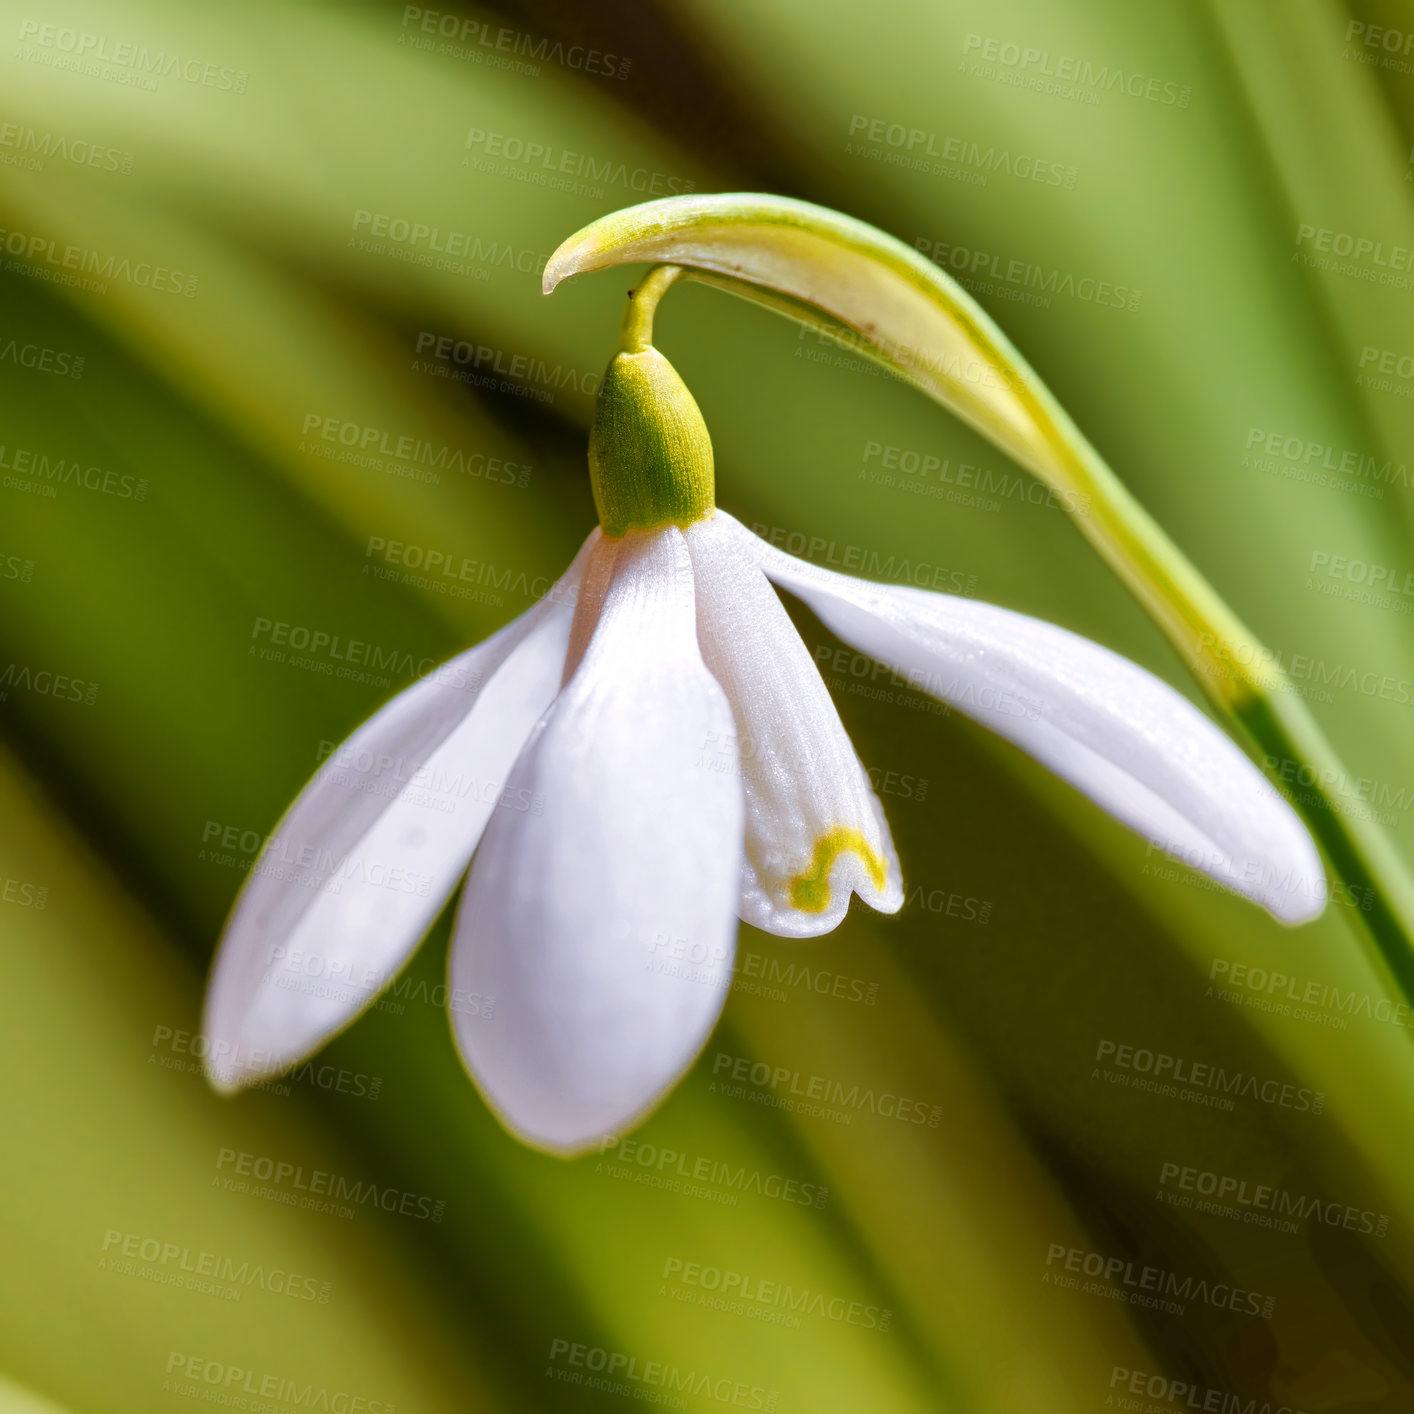 Buy stock photo Closeup of a snowdrop flower against blurred nature green background. Beautiful common white flowering plant or Galanthus Nivalis growing with petals, leaves and stem detail blooming in spring season